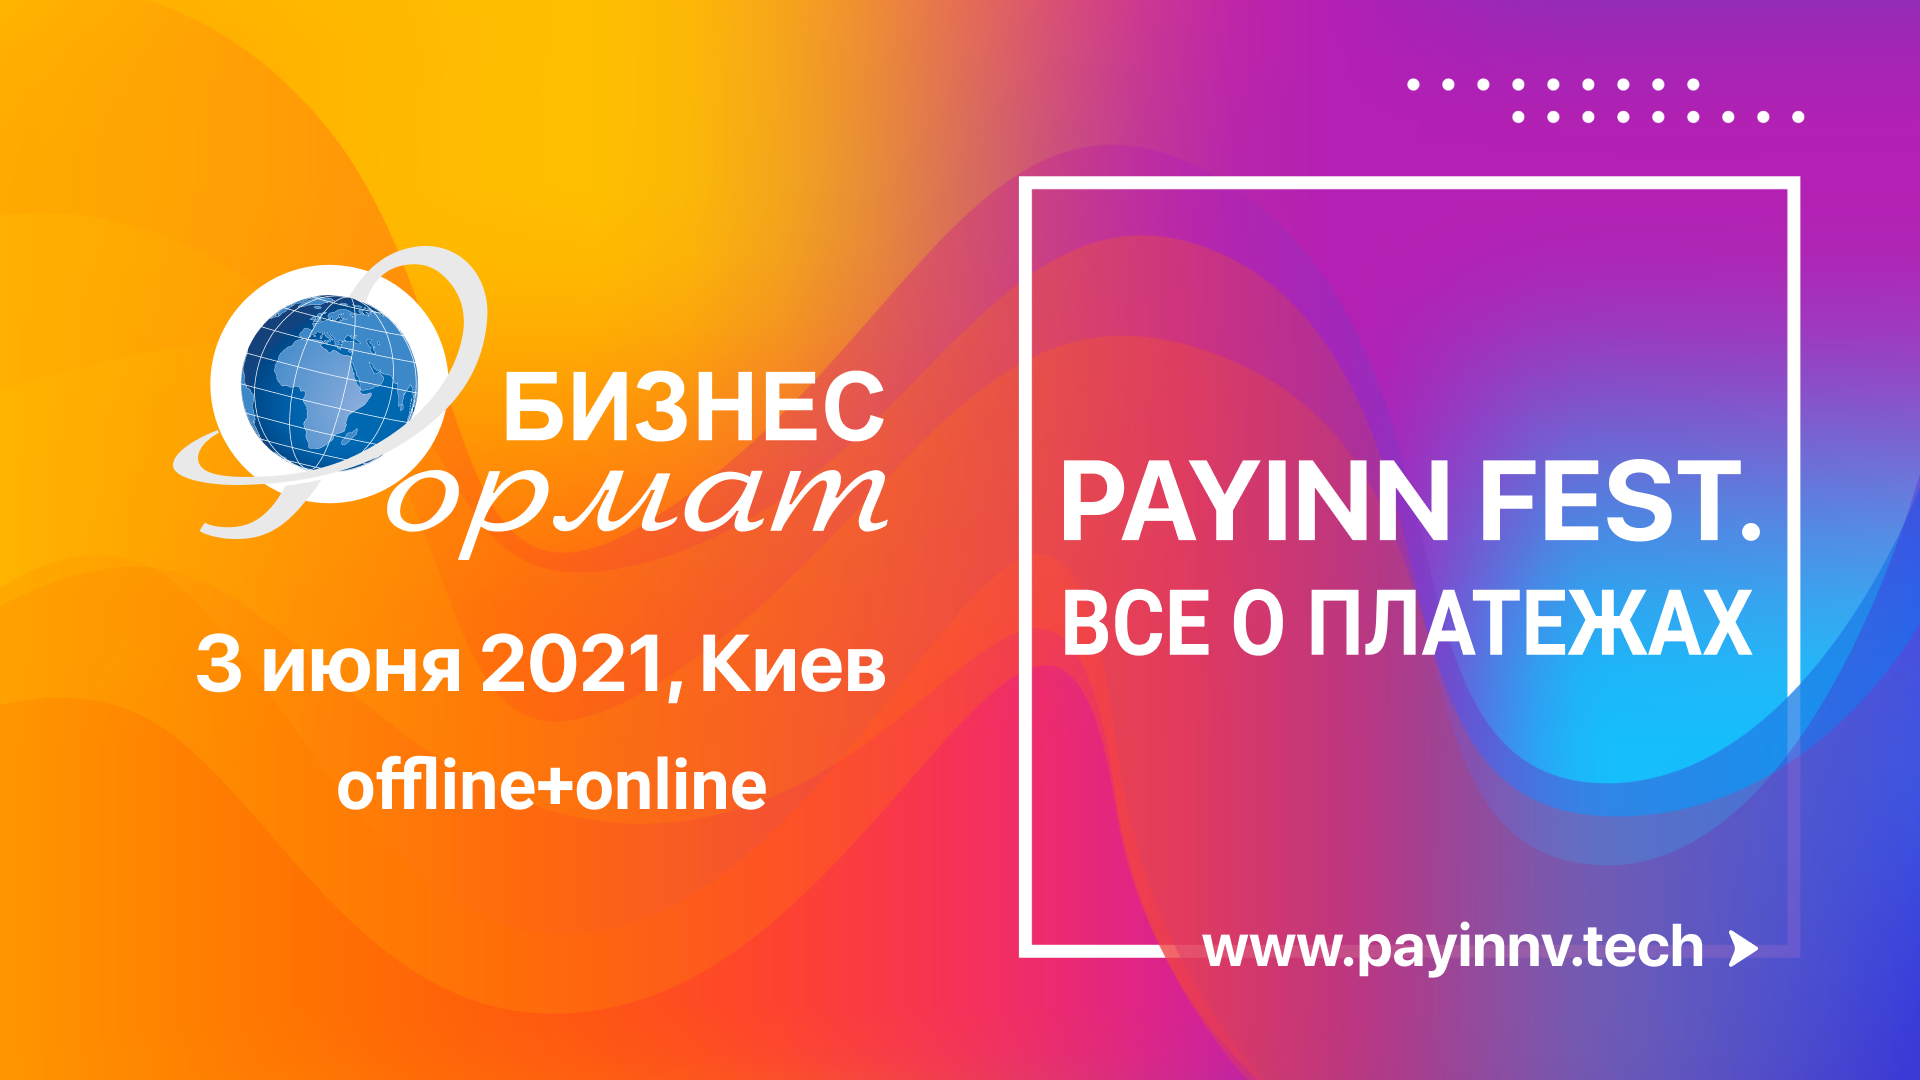 PAYINN FEST. ALL ABOUT PAYMENTS